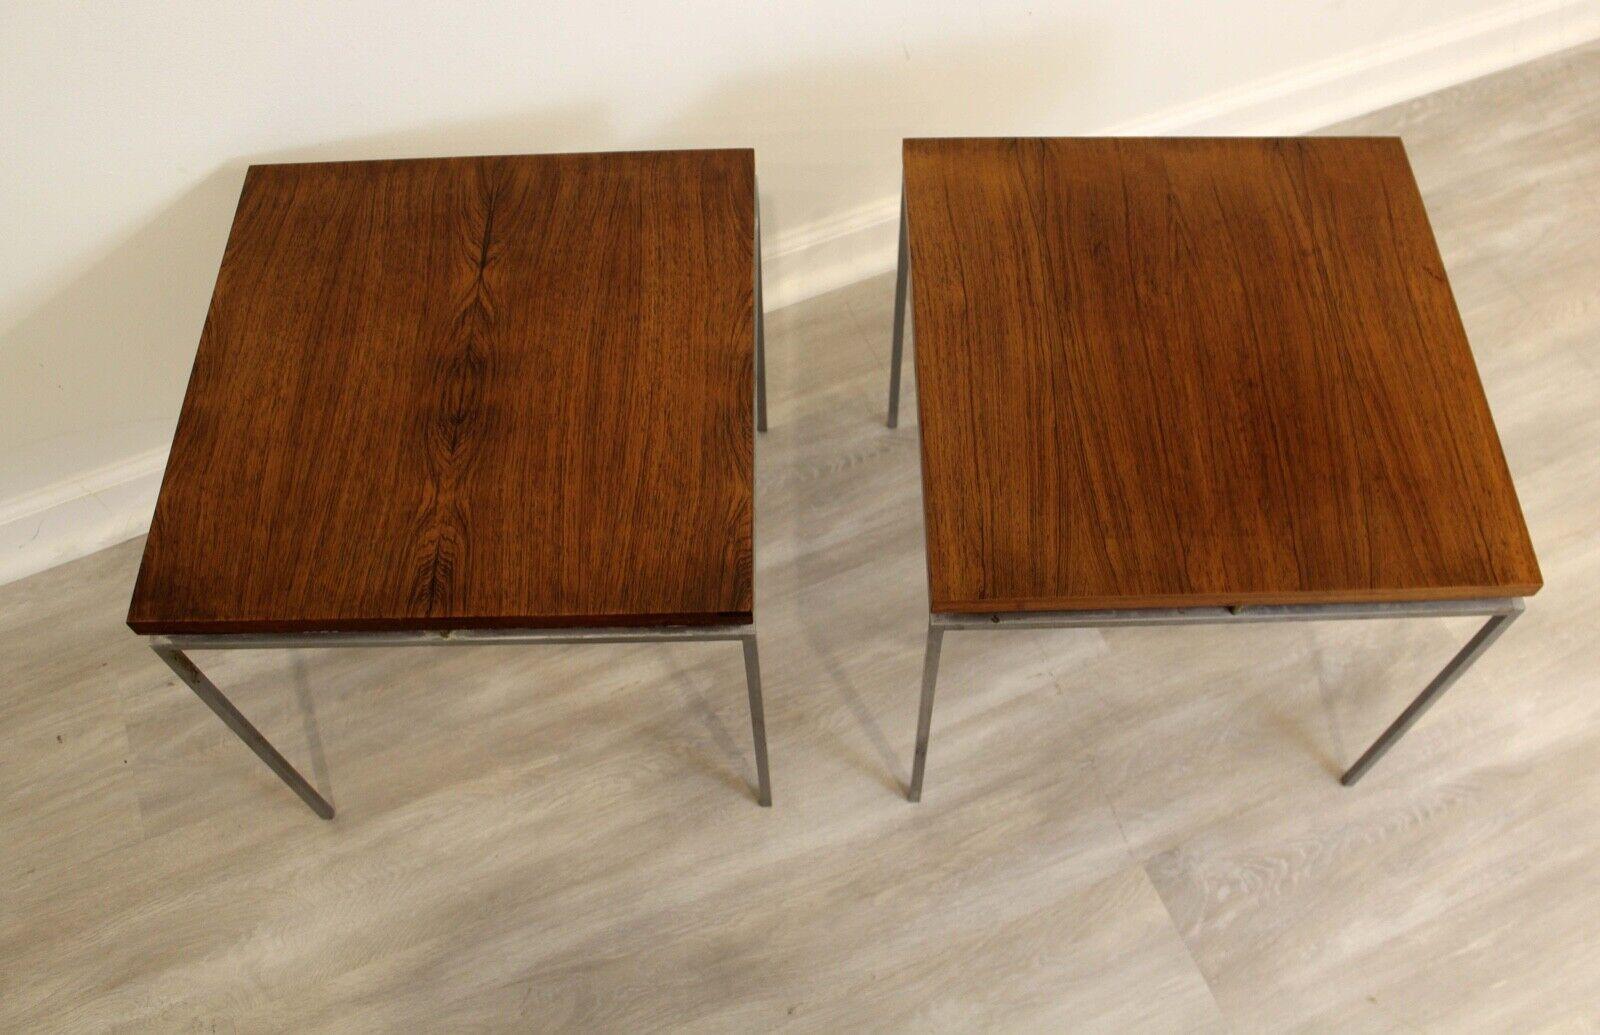 Pair of Mid-Century Modern Danish Rosewood Side Tables by Knud Joos for Mobler 1